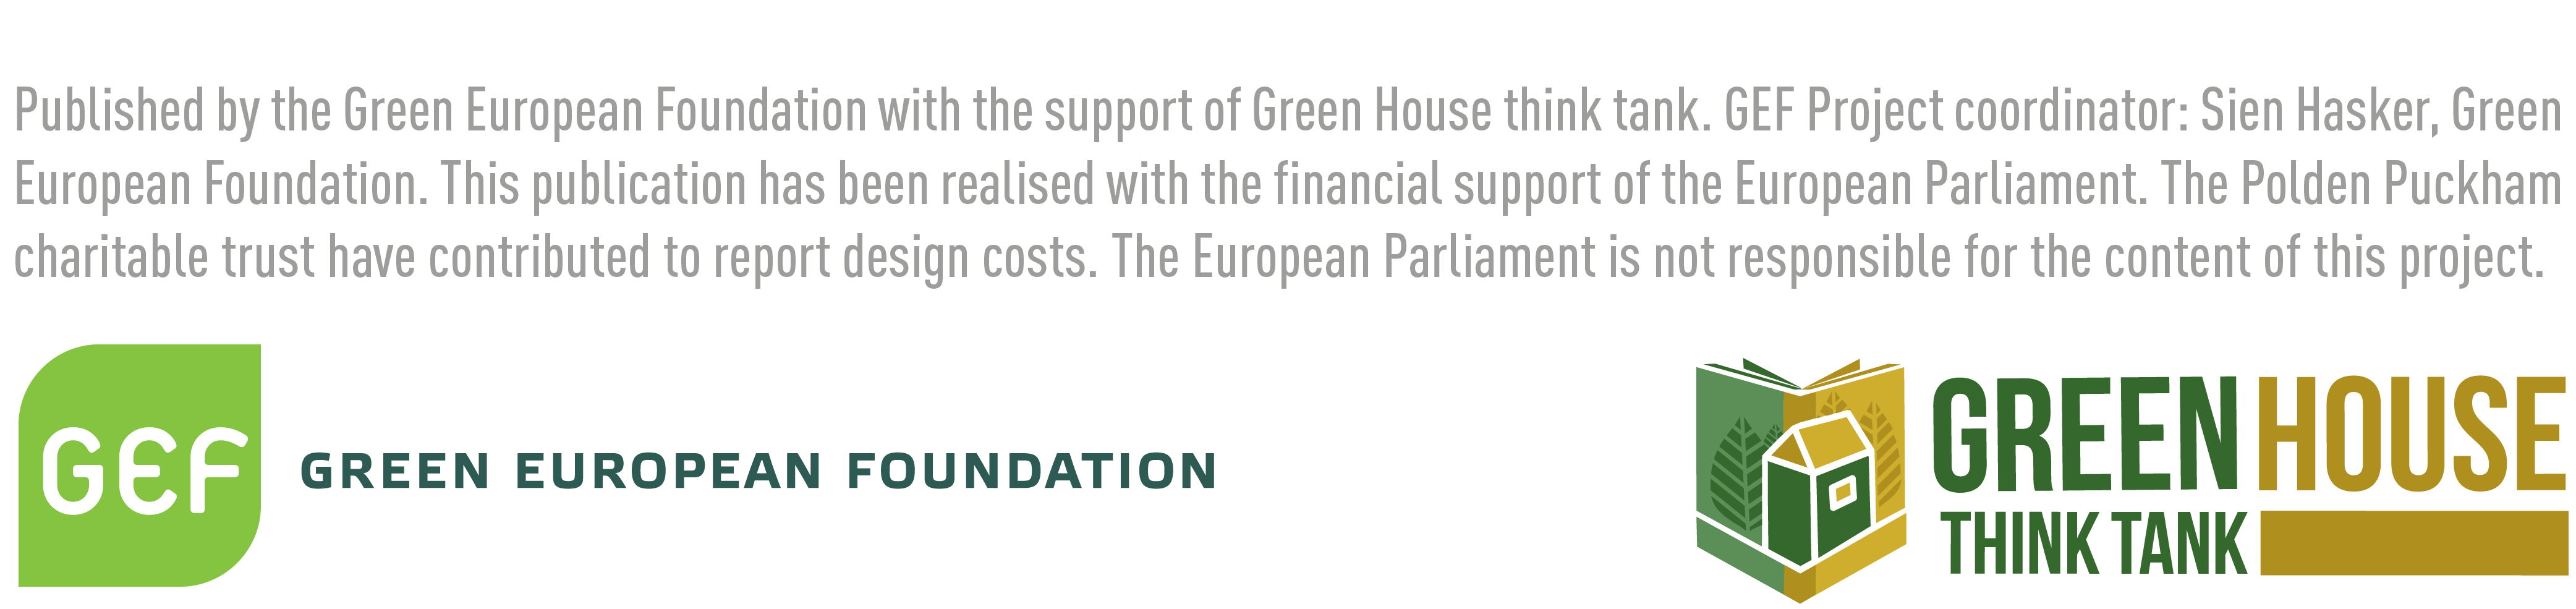 Images of the logos of the Green European Foundation of the Green House Think Tank with text that reads Published by the Green European Foundation with the support of Green House think tank. GEF project coordinator: Sian Hasker, Green European Foundation. This publication has been realised with financial support of the European parliament. The Polden Puckham charitable trust have contributed to the report design costs. The European Parliament is not responsible for the content of this project. 